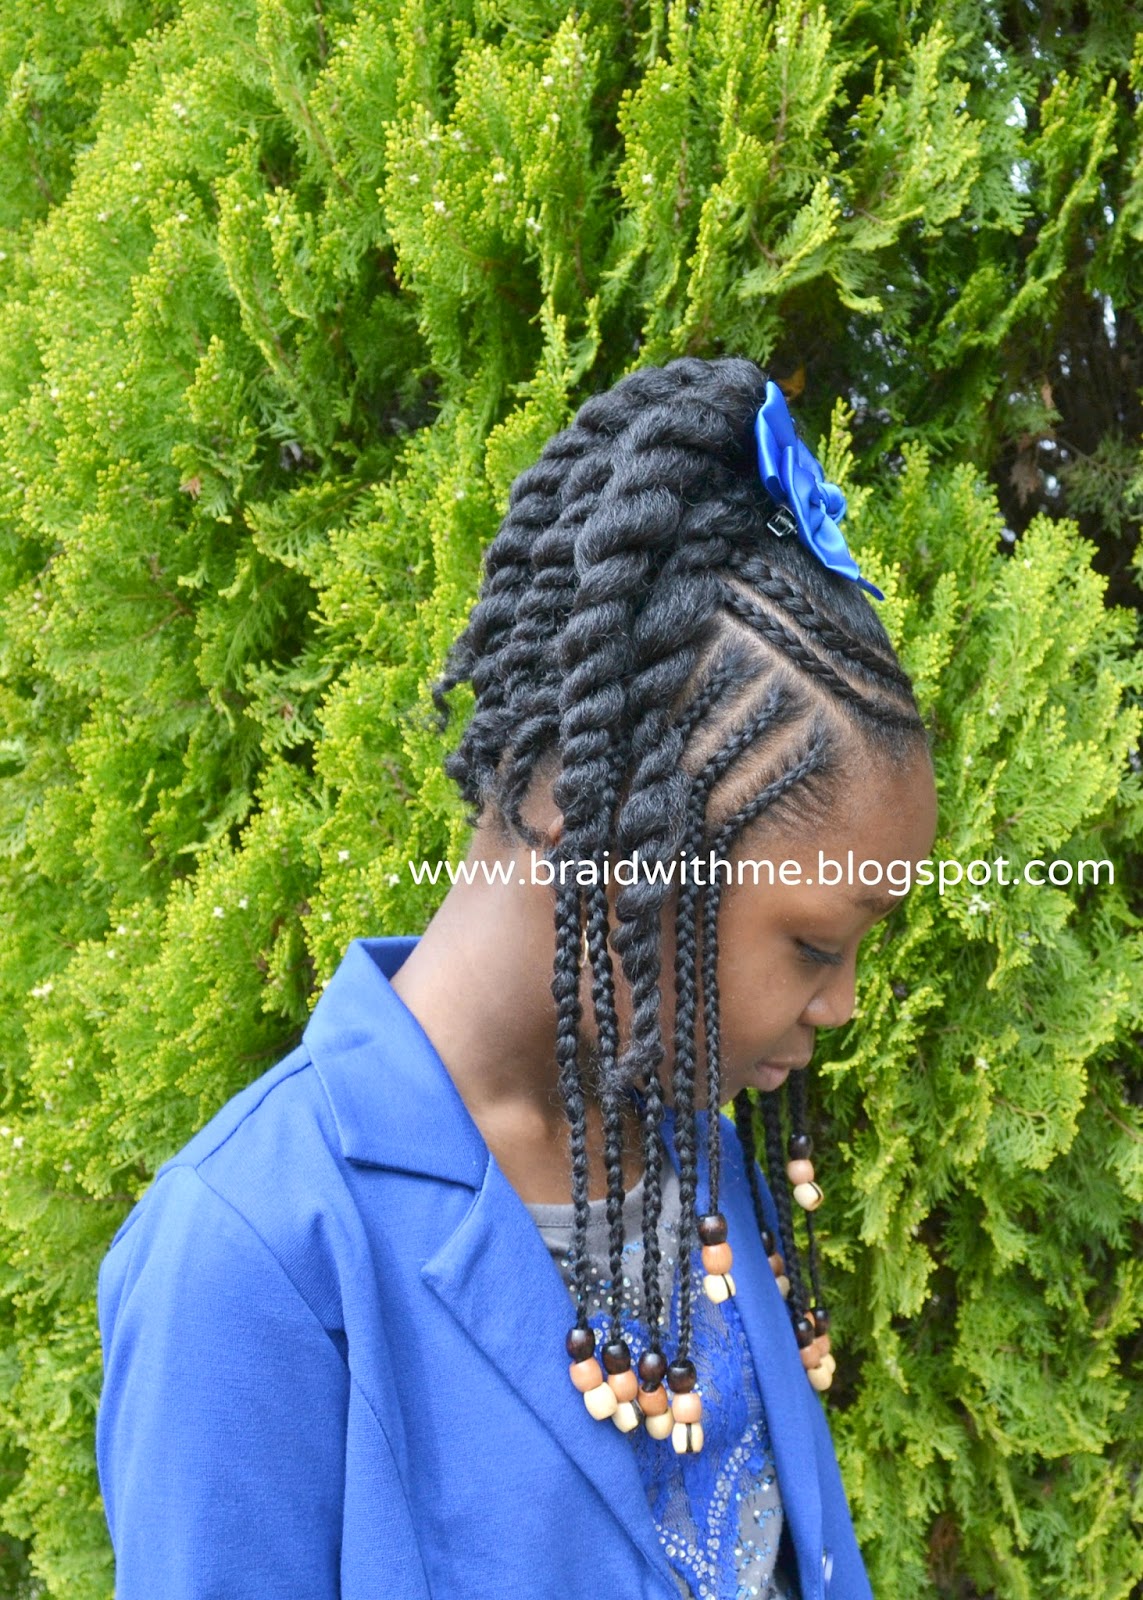 Braided Hairstyles For Little Girls With Beads Products Used: